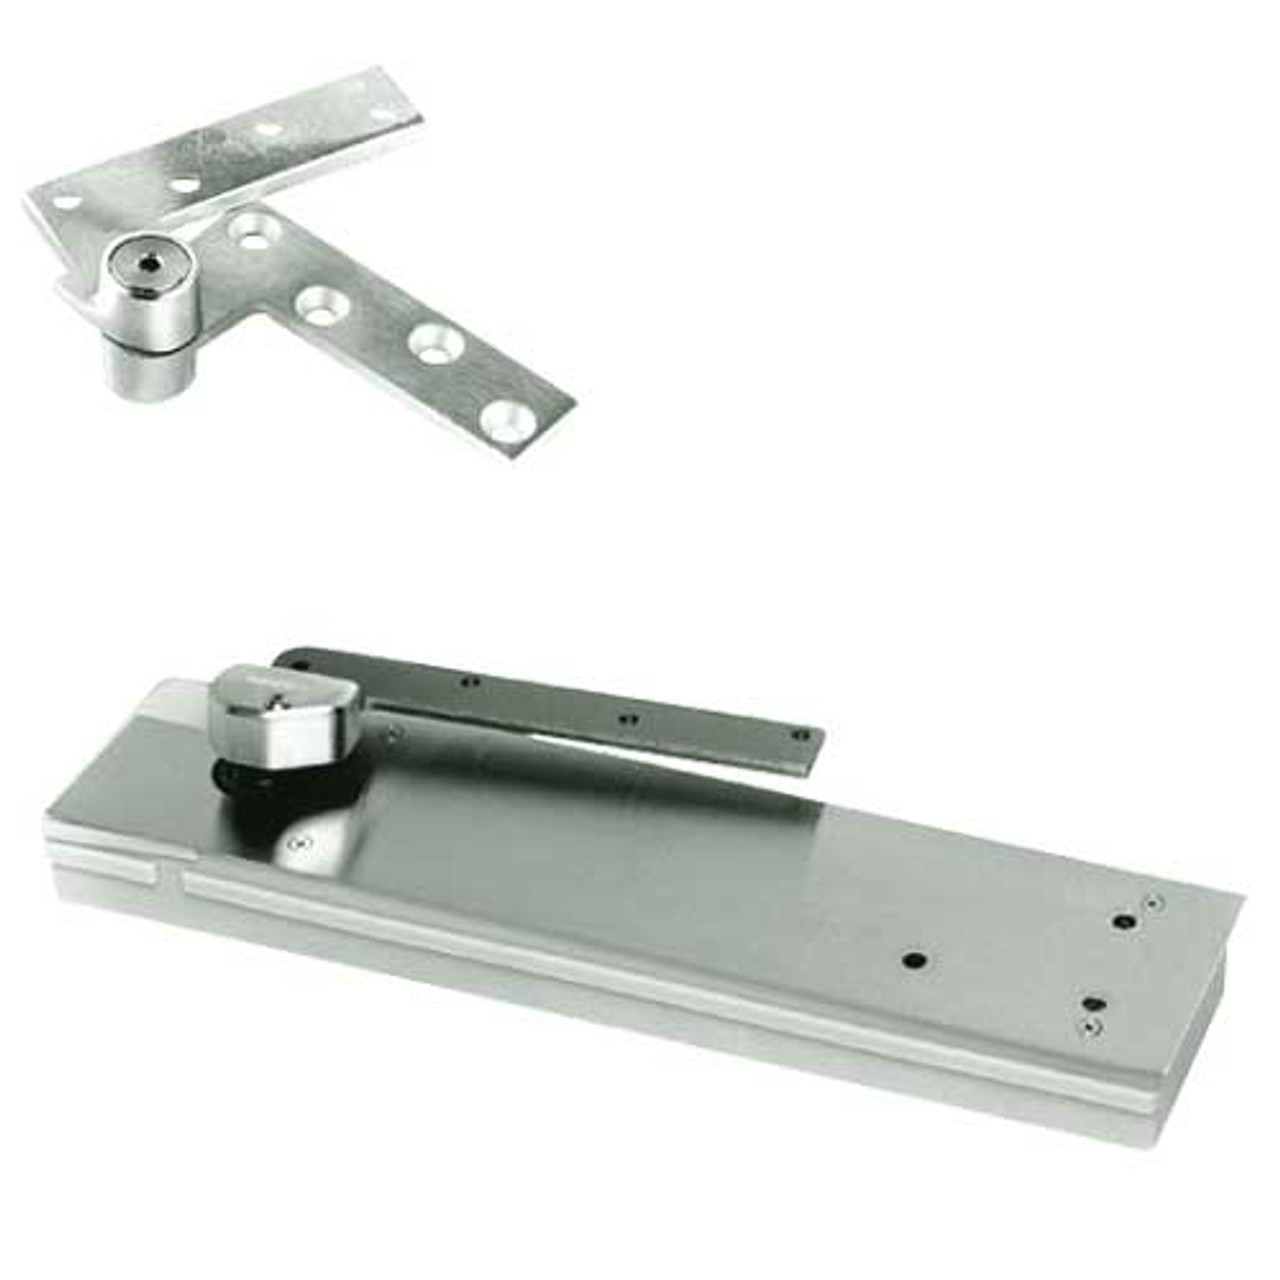 5103ABC105-LTP-LH-618 Rixson 51 Series 3/4" Offset Hung Shallow Depth Floor Closers in Bright Nickel Finish